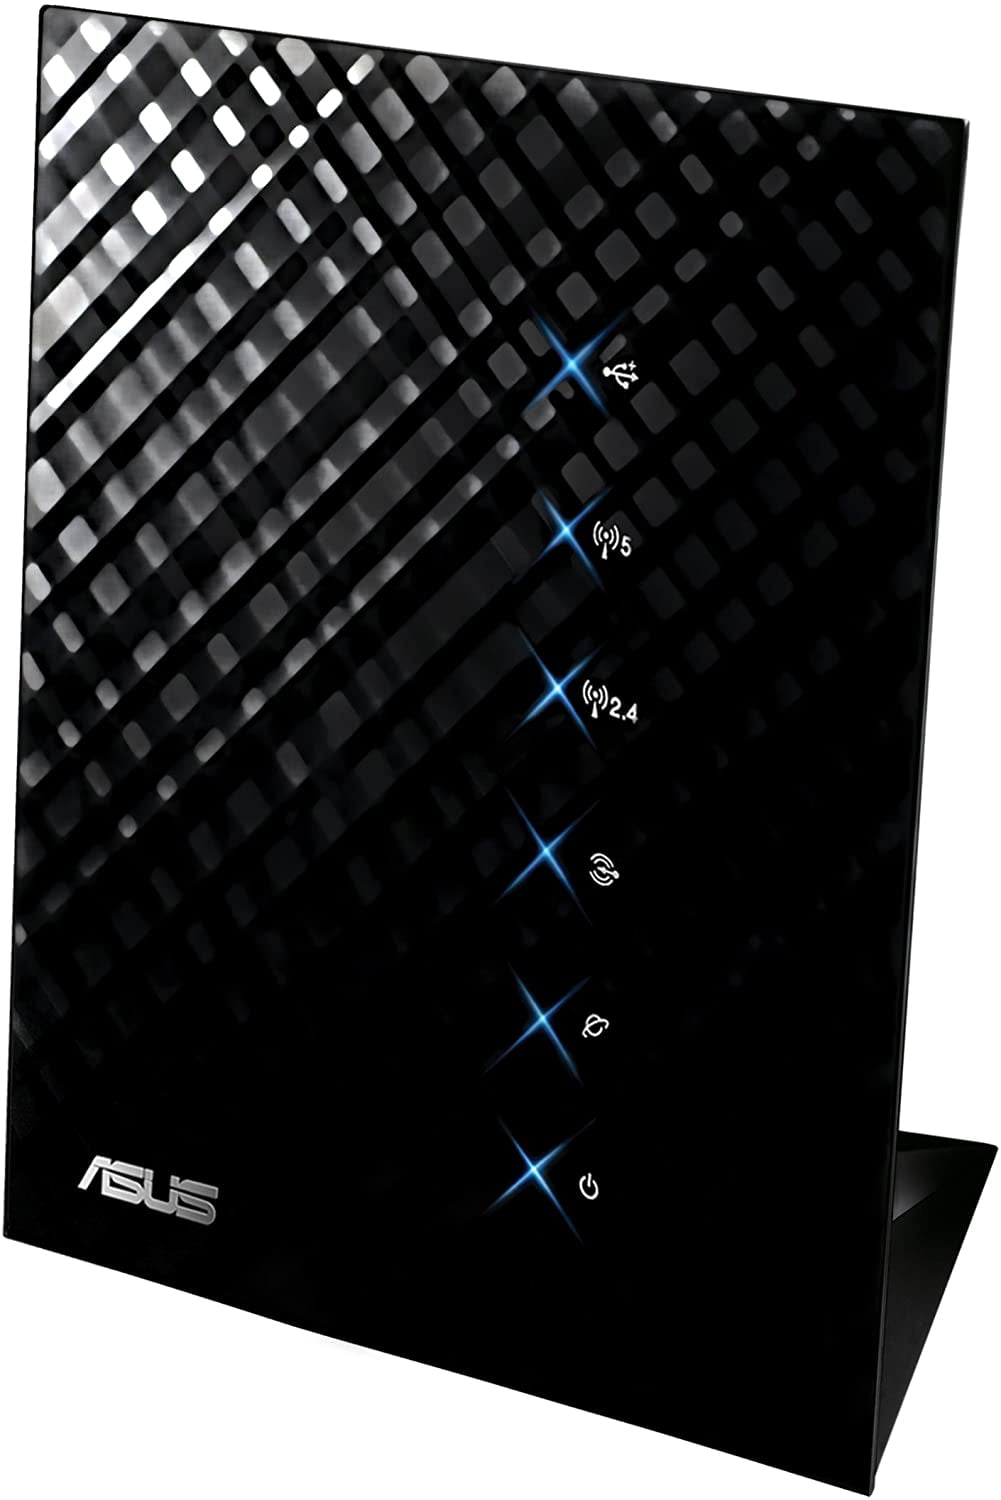 ASUS RT-N56U Dual-Band Wireless-N600 Gigabit Wireless Router 600 Mbps 